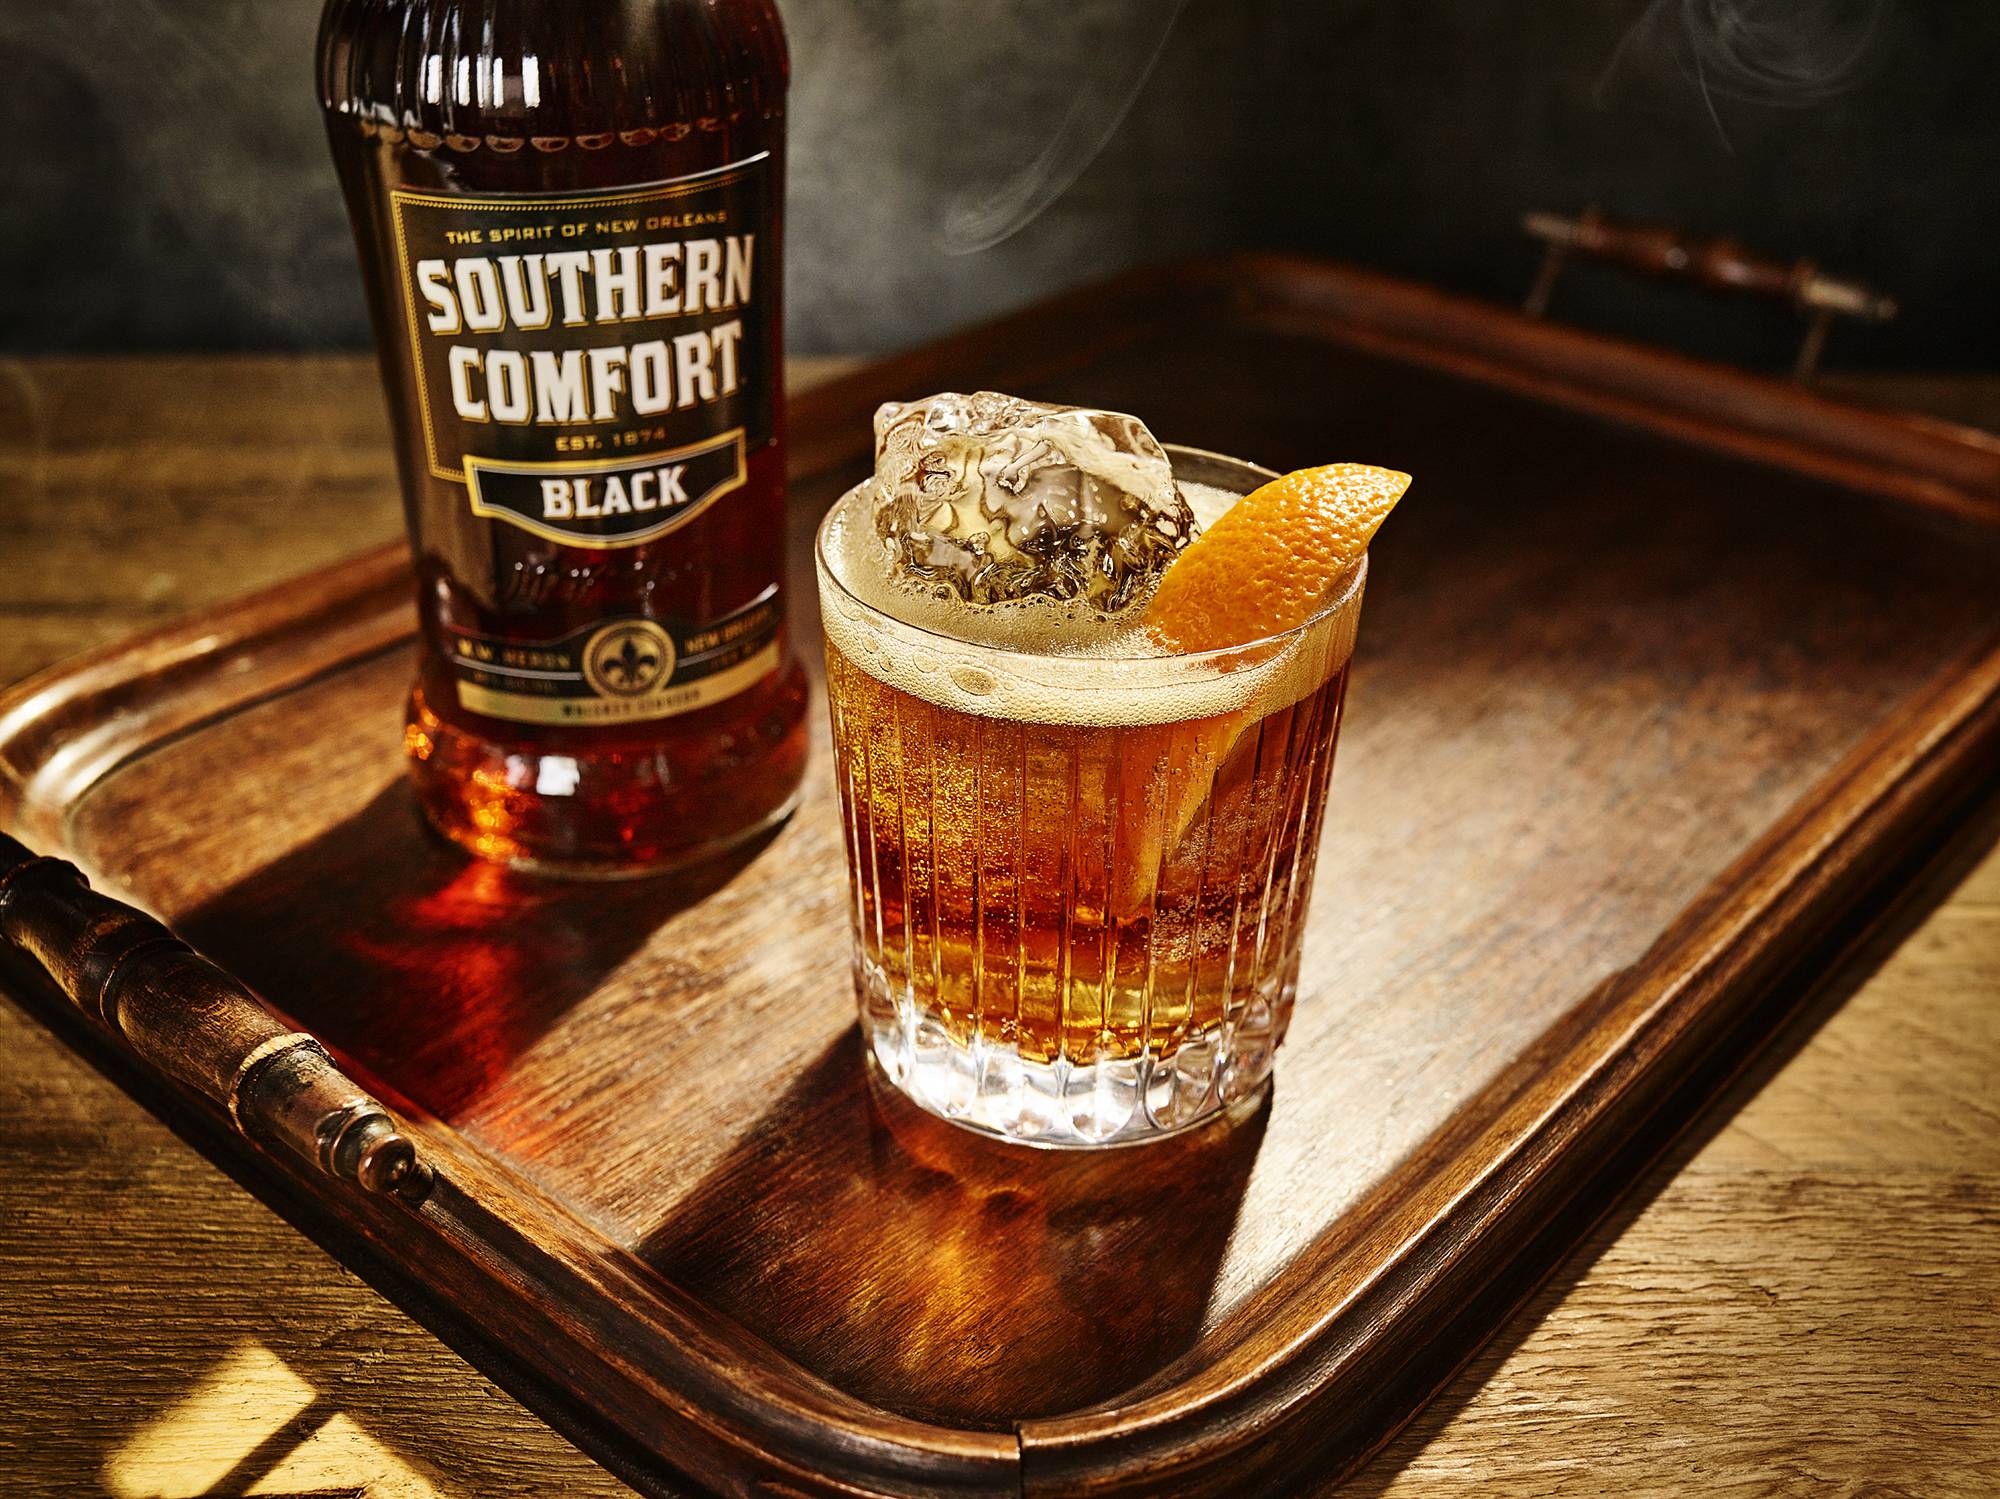 Southern Comfort Black serves up the authentic taste of New Orleans